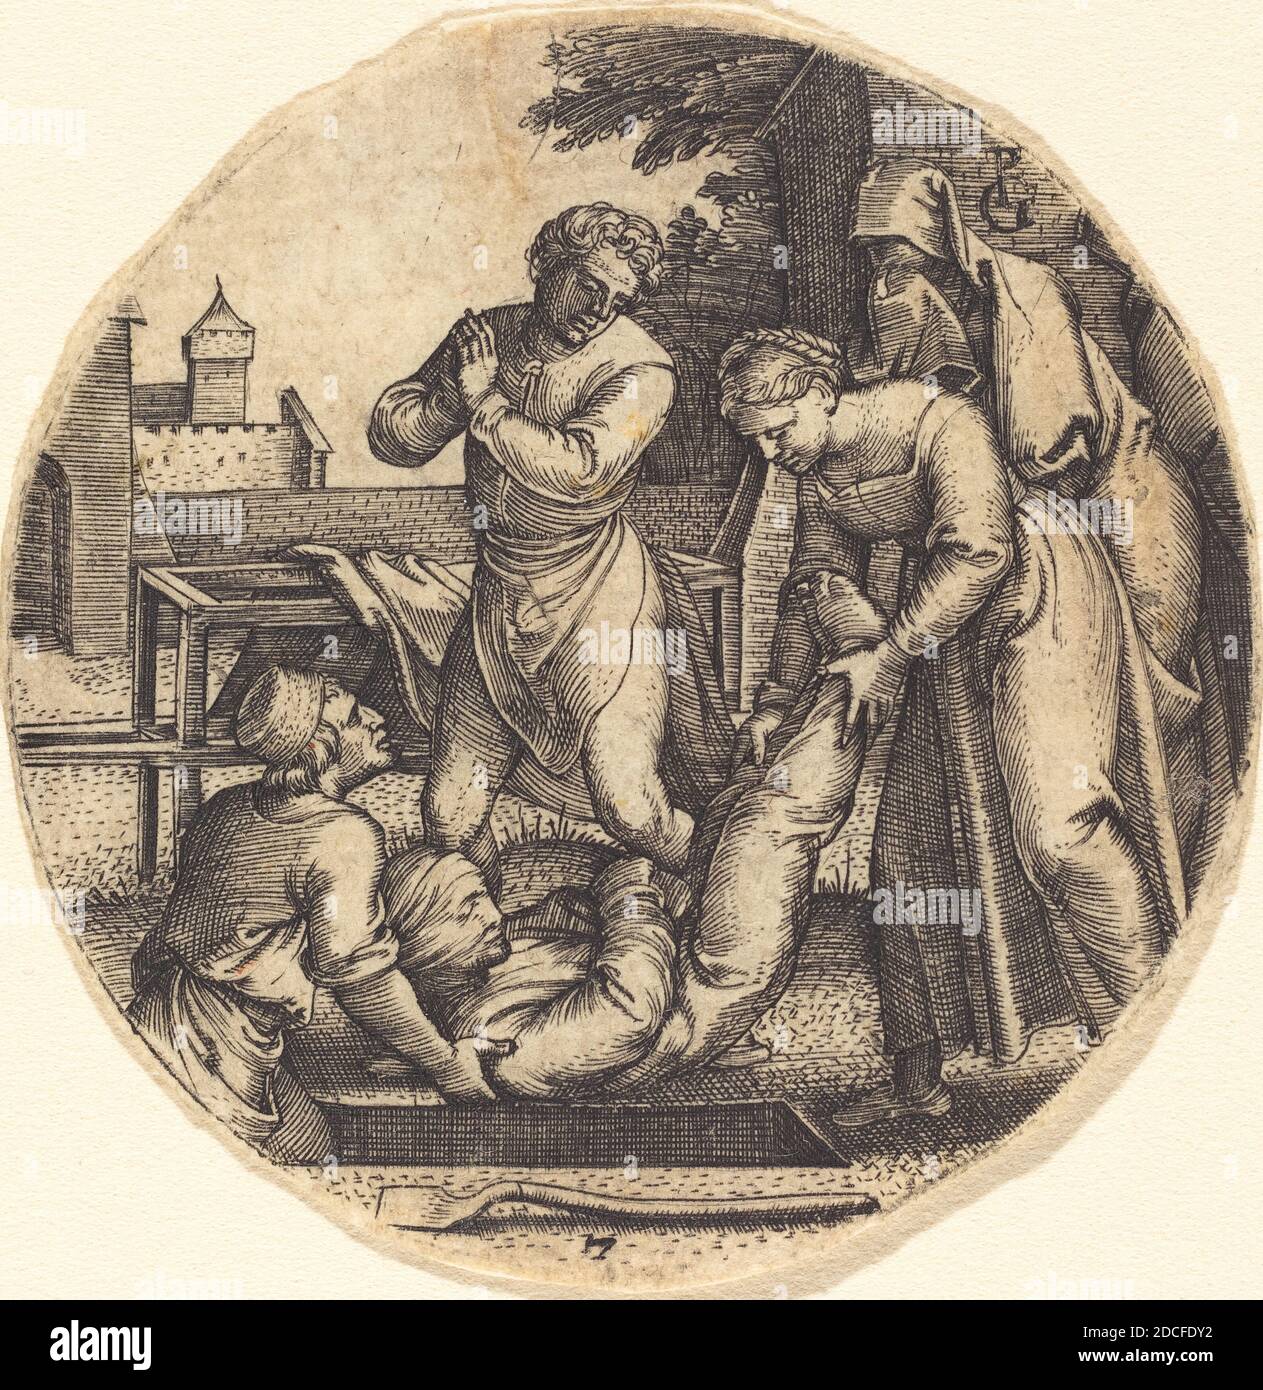 Georg Pencz, (artist), German, c. 1500 - 1550, To Bury the Dead, The Seven Works of Mercy, (series), engraving Stock Photo